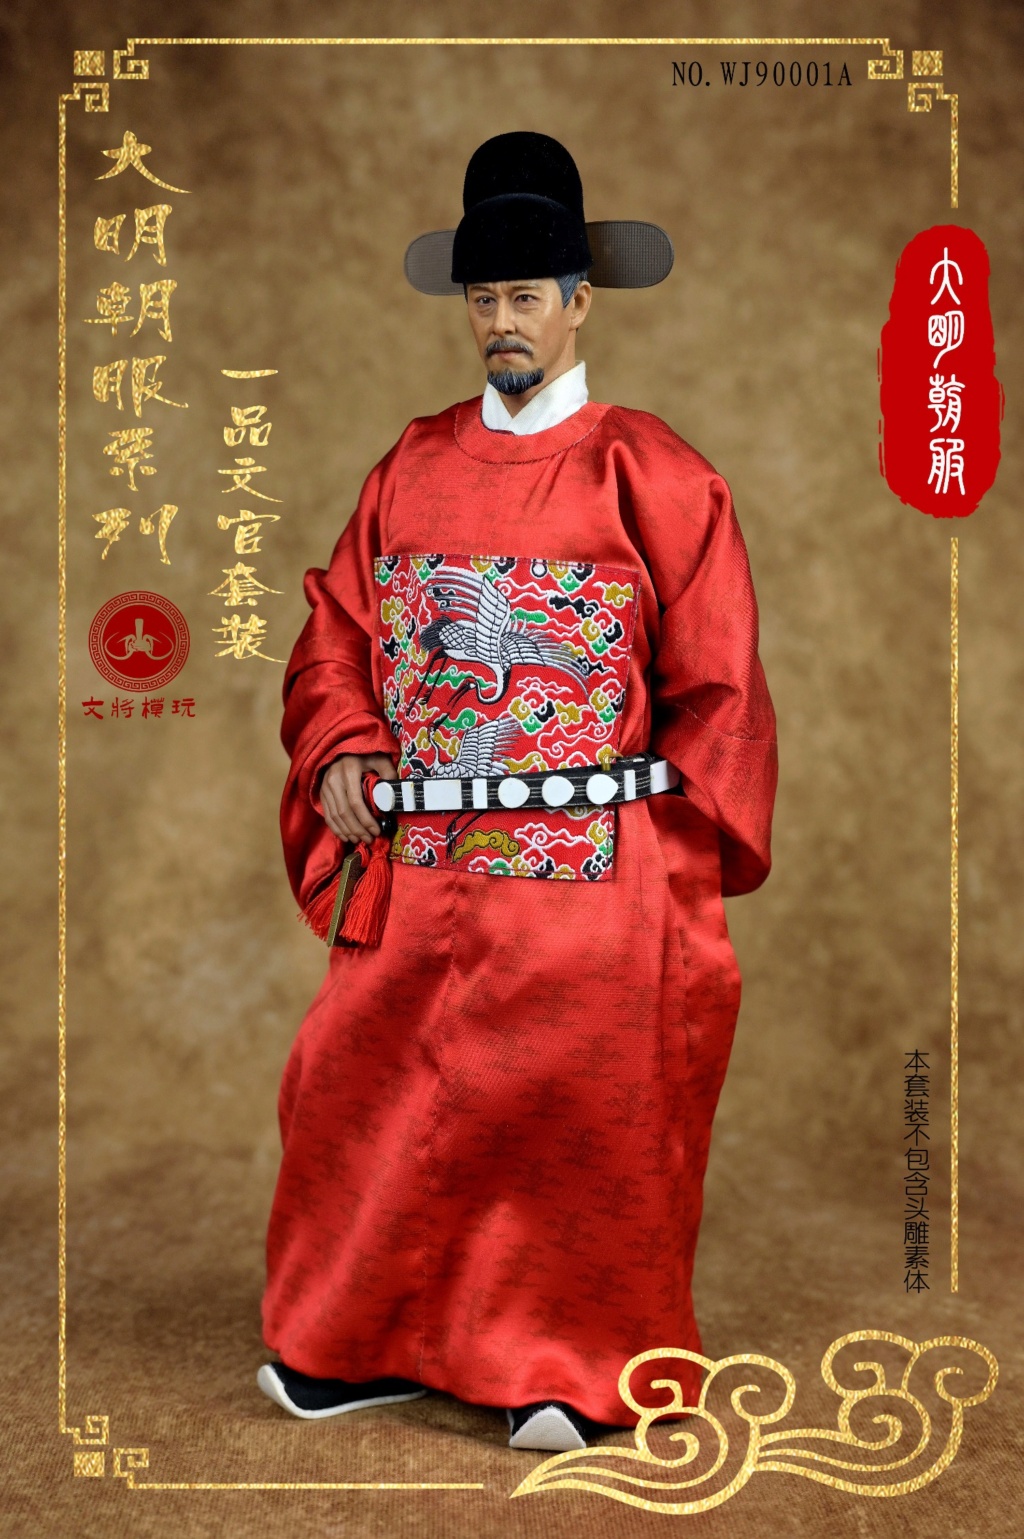 civilian - NEW PRODUCT: Wenjiang Model Play: 1/6 Ming Dynasty Clothes Series - Yipin Civilian/Military Officer Set WJ90001A/B 16473810